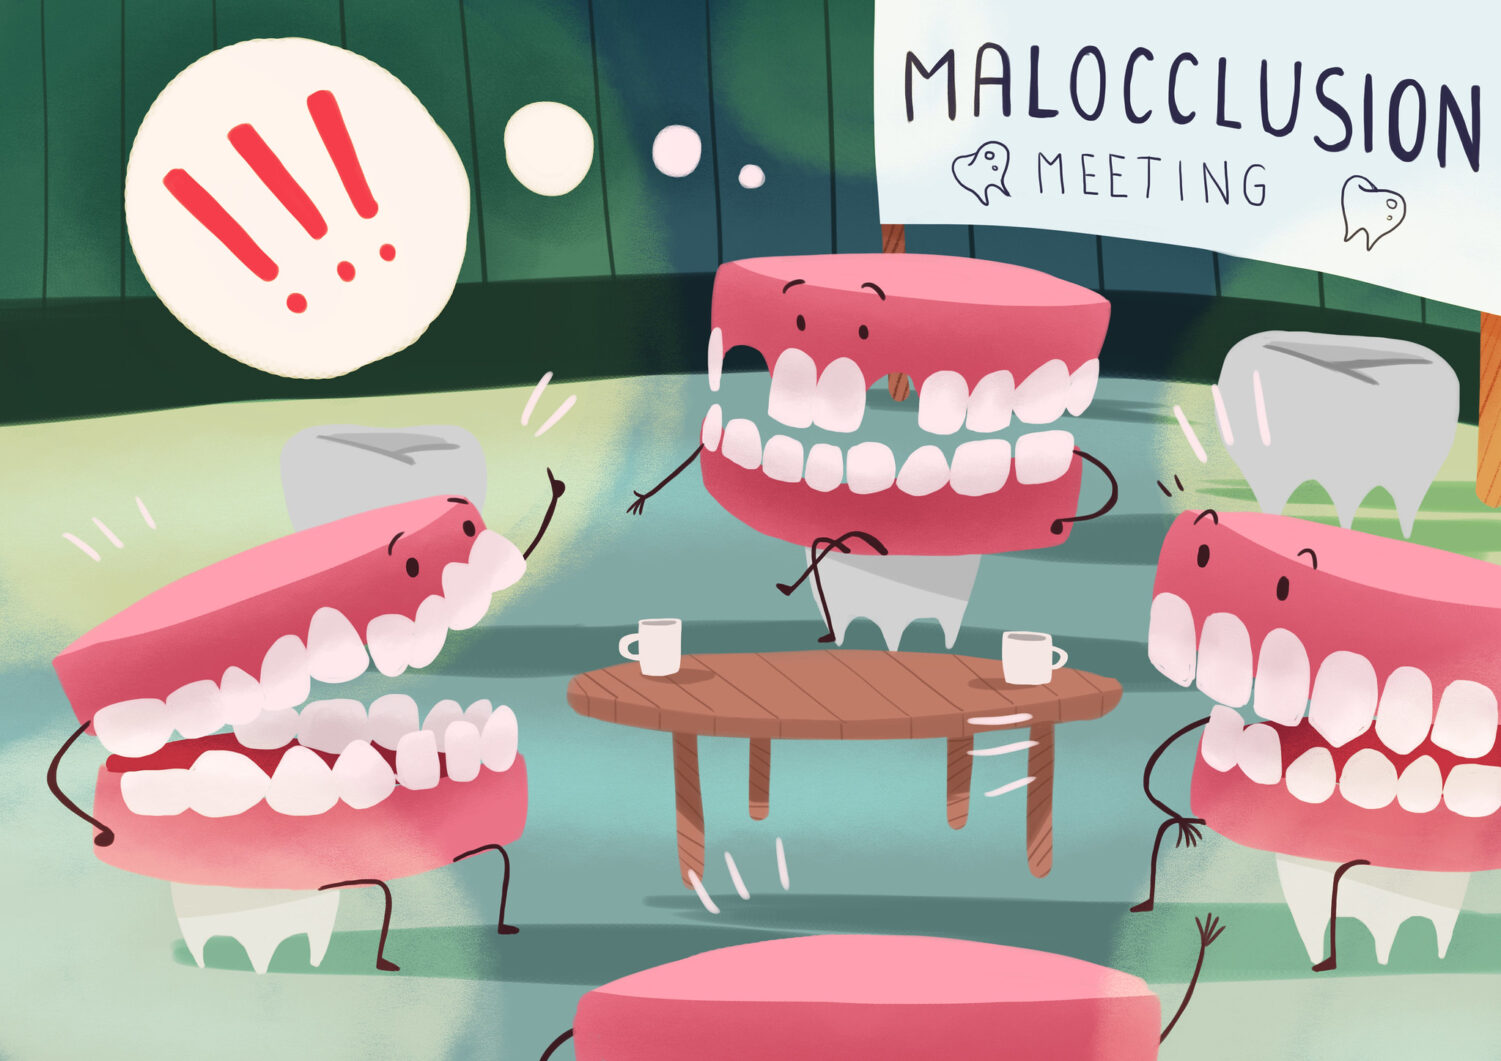 graphic illustration of 3 dental arches with teeth meeting at a "malocclusion meeting"